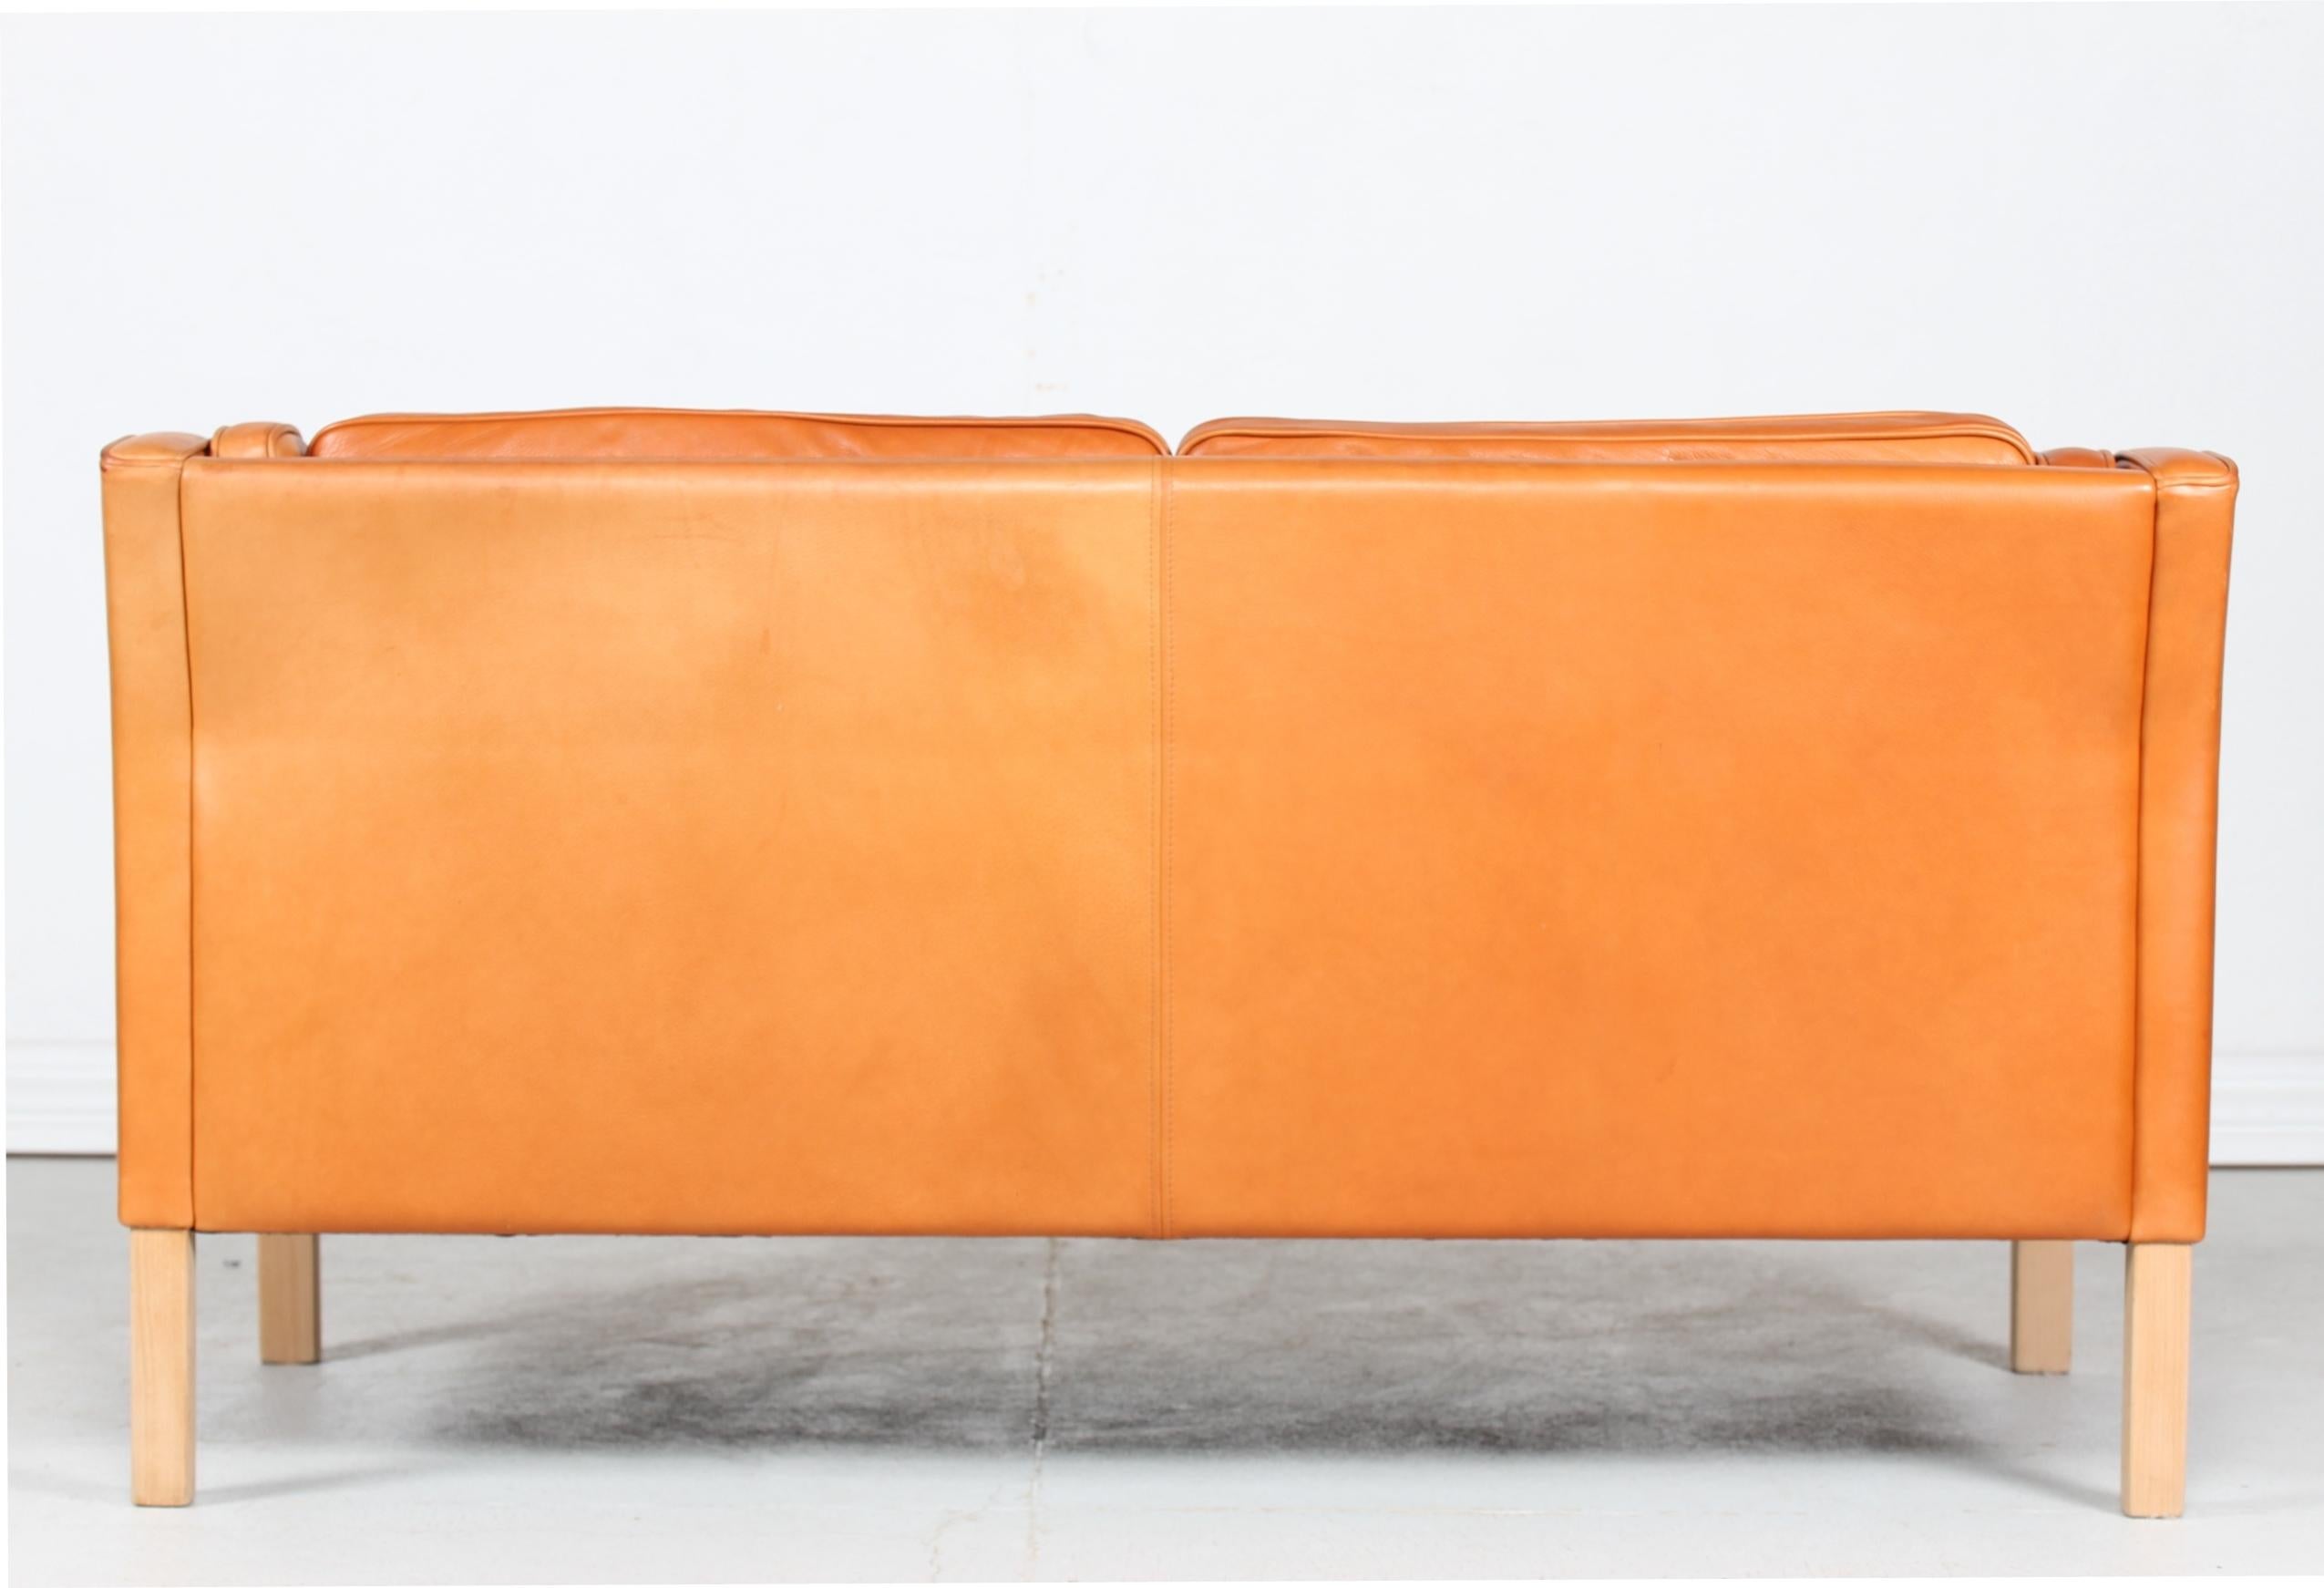 Mid-Century Modern Danish Modern Two-Seat Sofa with Cognac-Colored Patina Leather Made in Denmark